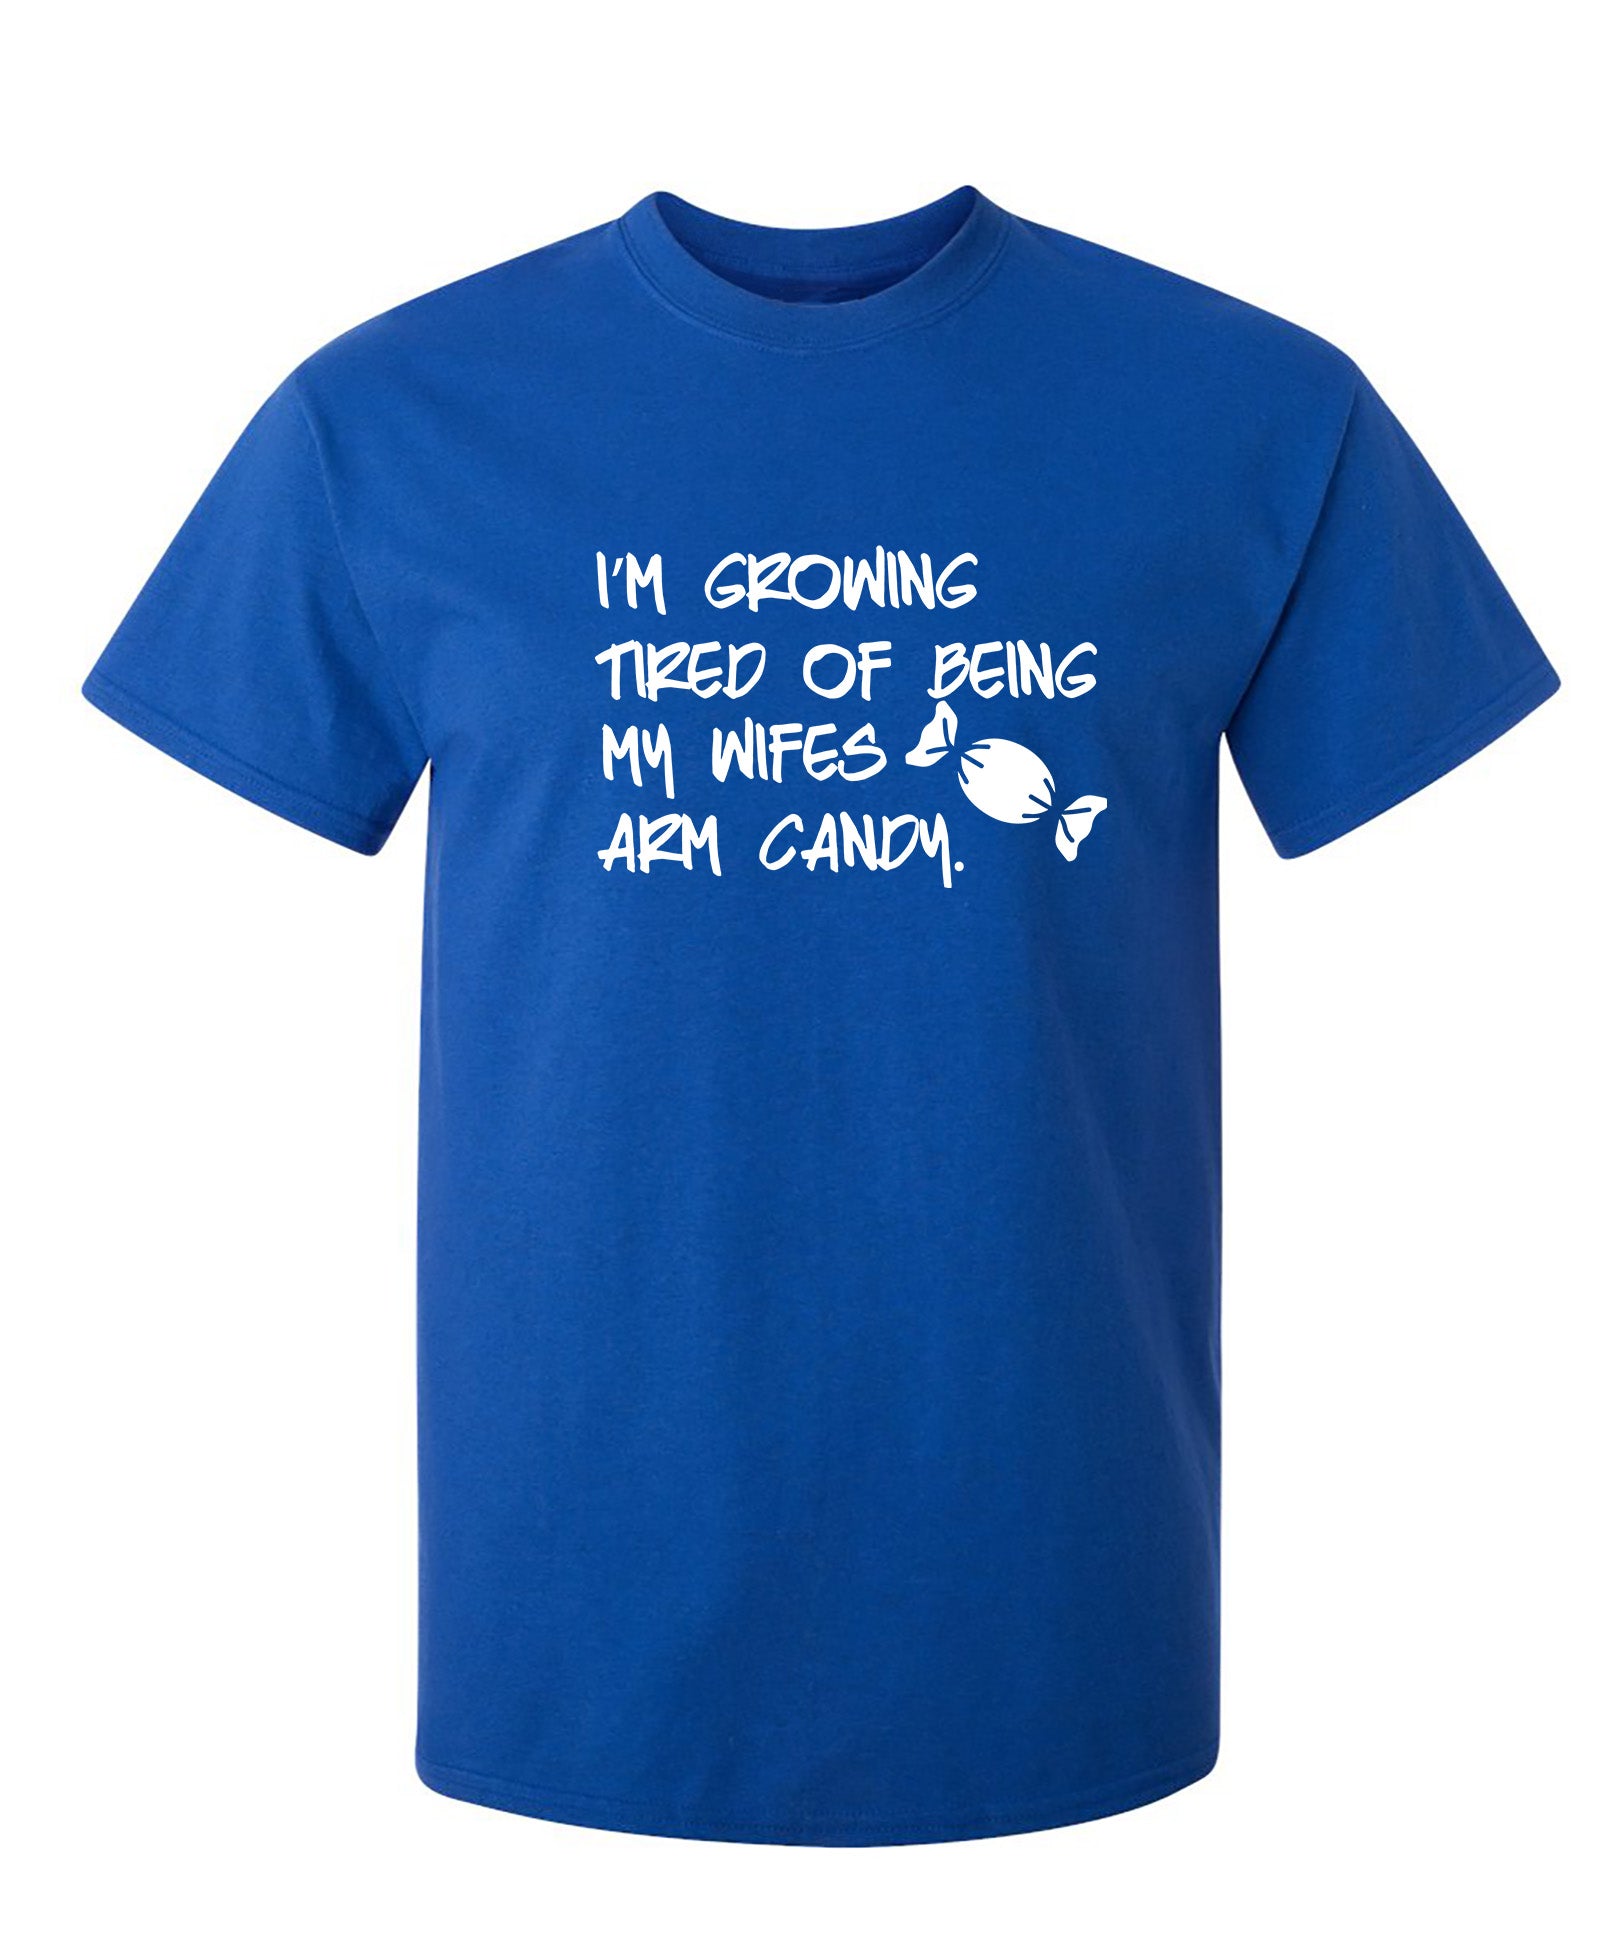 I'm Growing Tired Of Being My Wife - Funny T Shirts & Graphic Tees